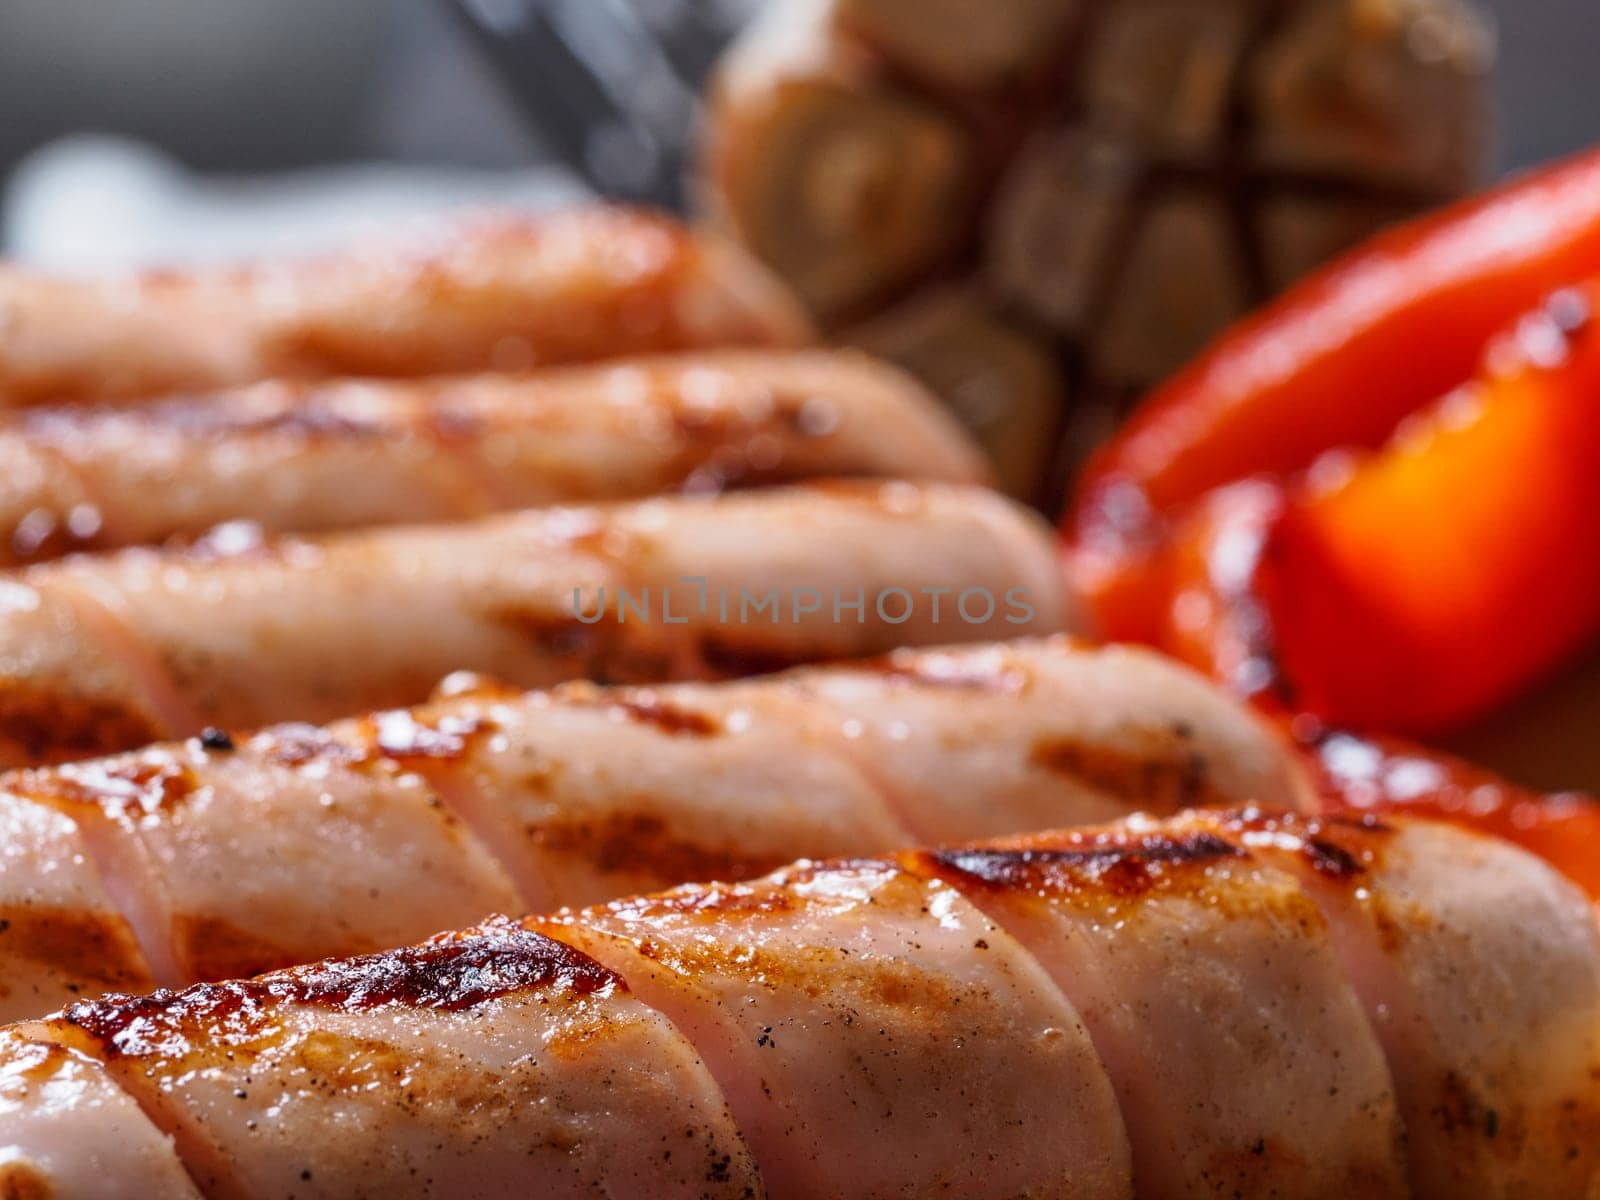 Close up view of chicken homemade sausages. Grilled sausages and grilled vegetables. Copy space.